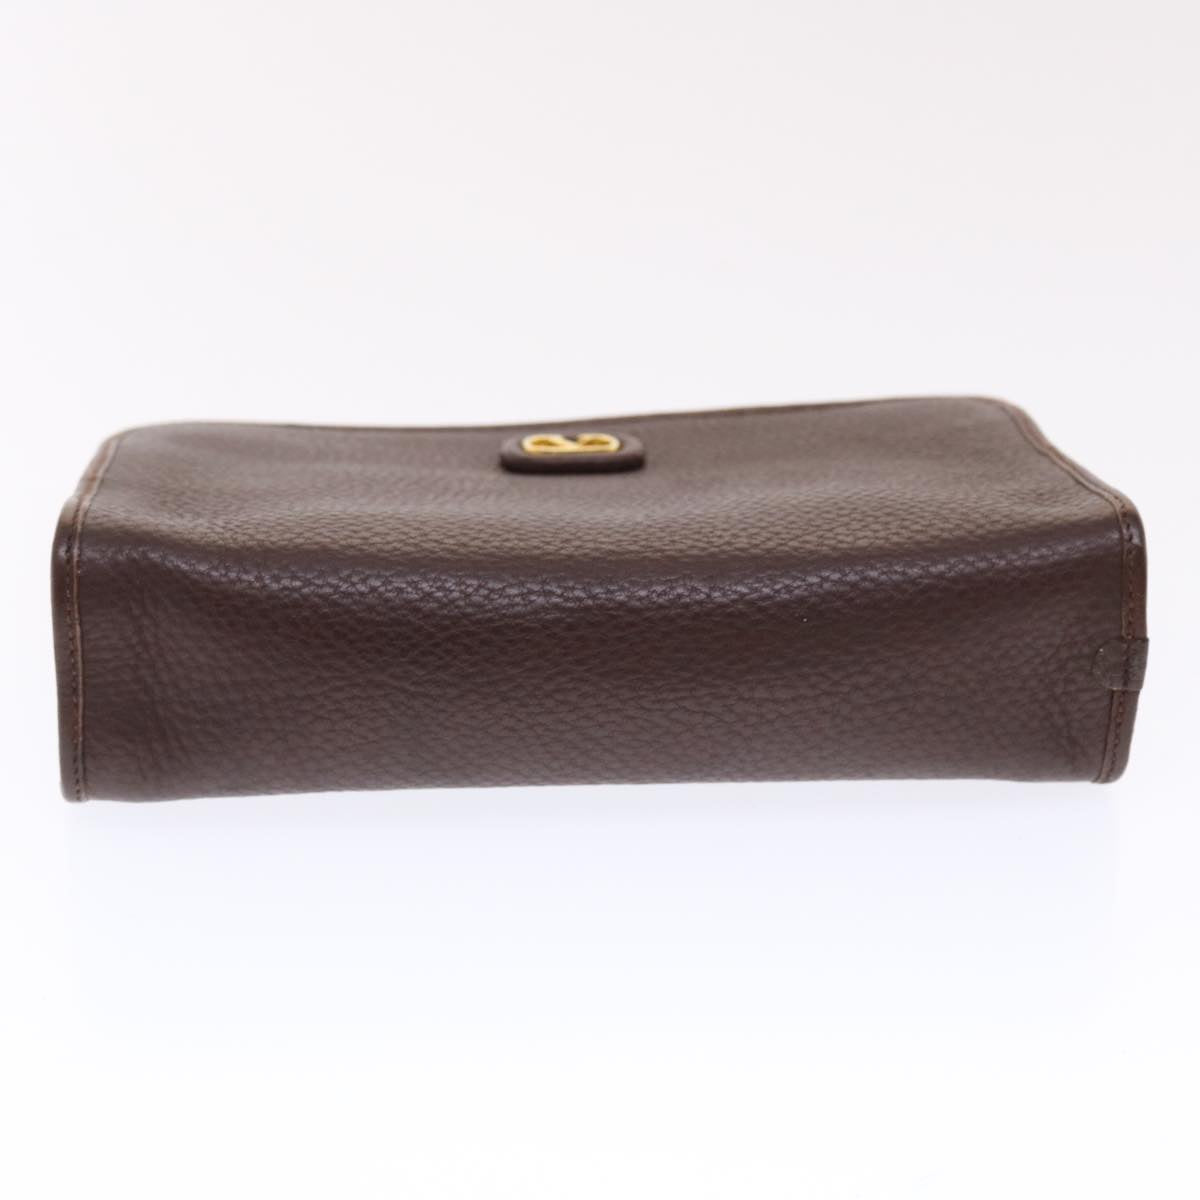 VALENTINO Clutch Bag Leather Brown Auth bs7148